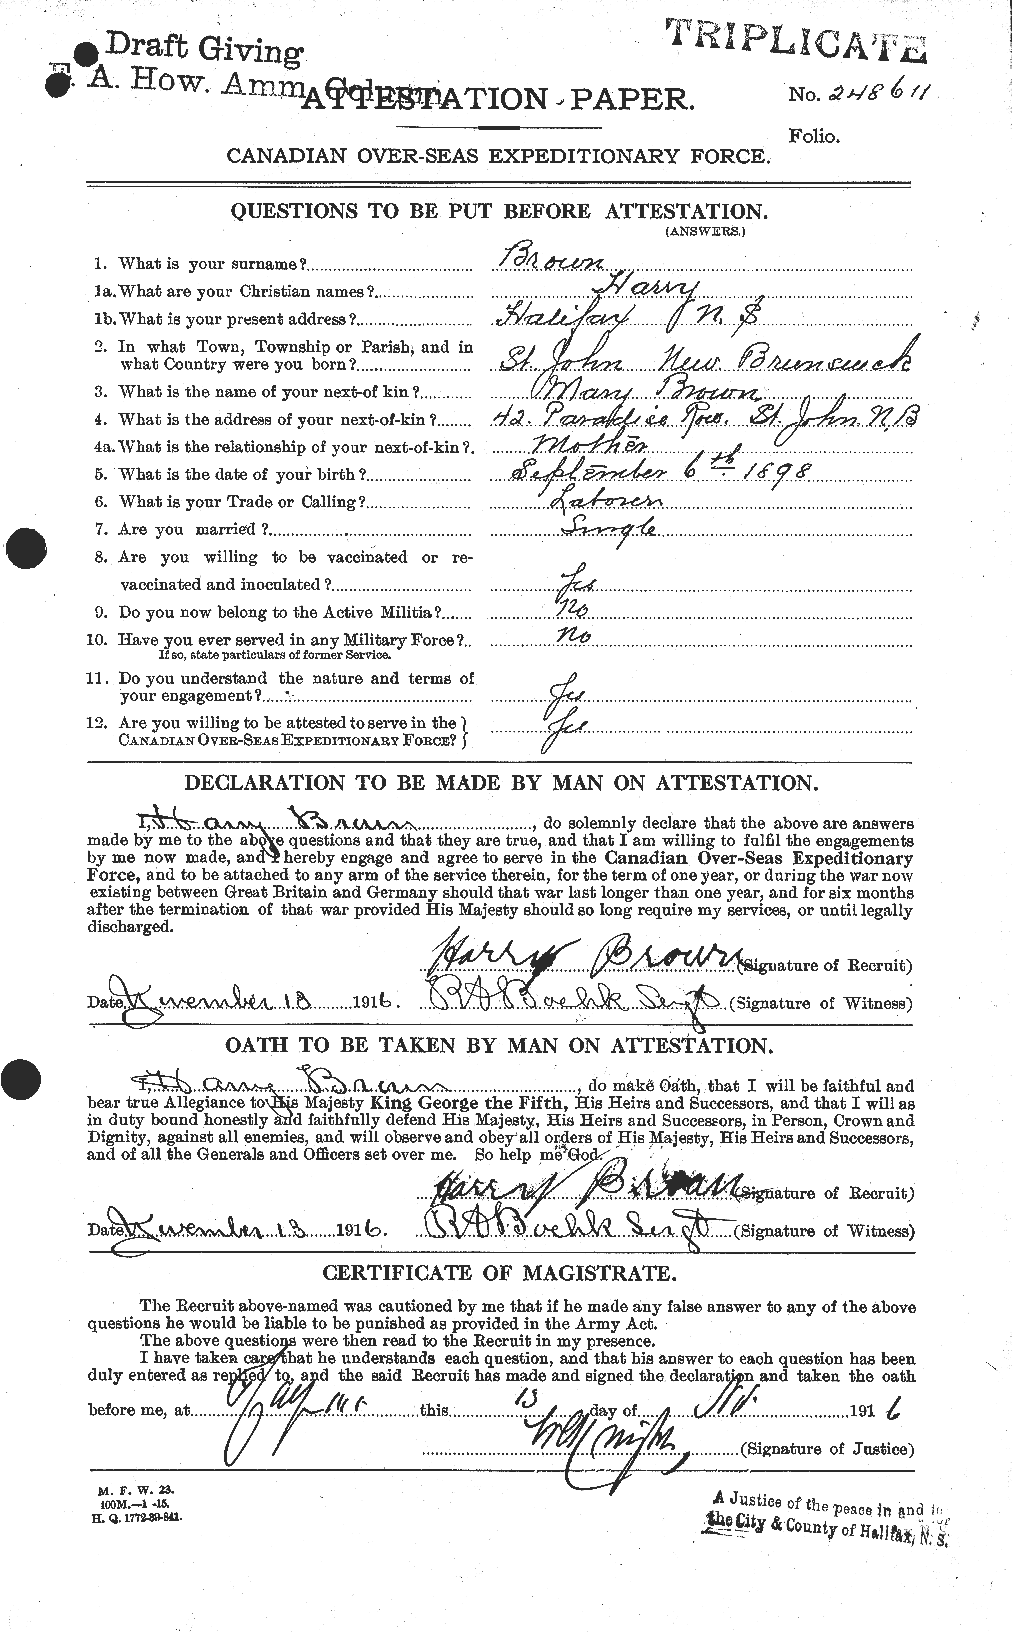 Personnel Records of the First World War - CEF 265395a